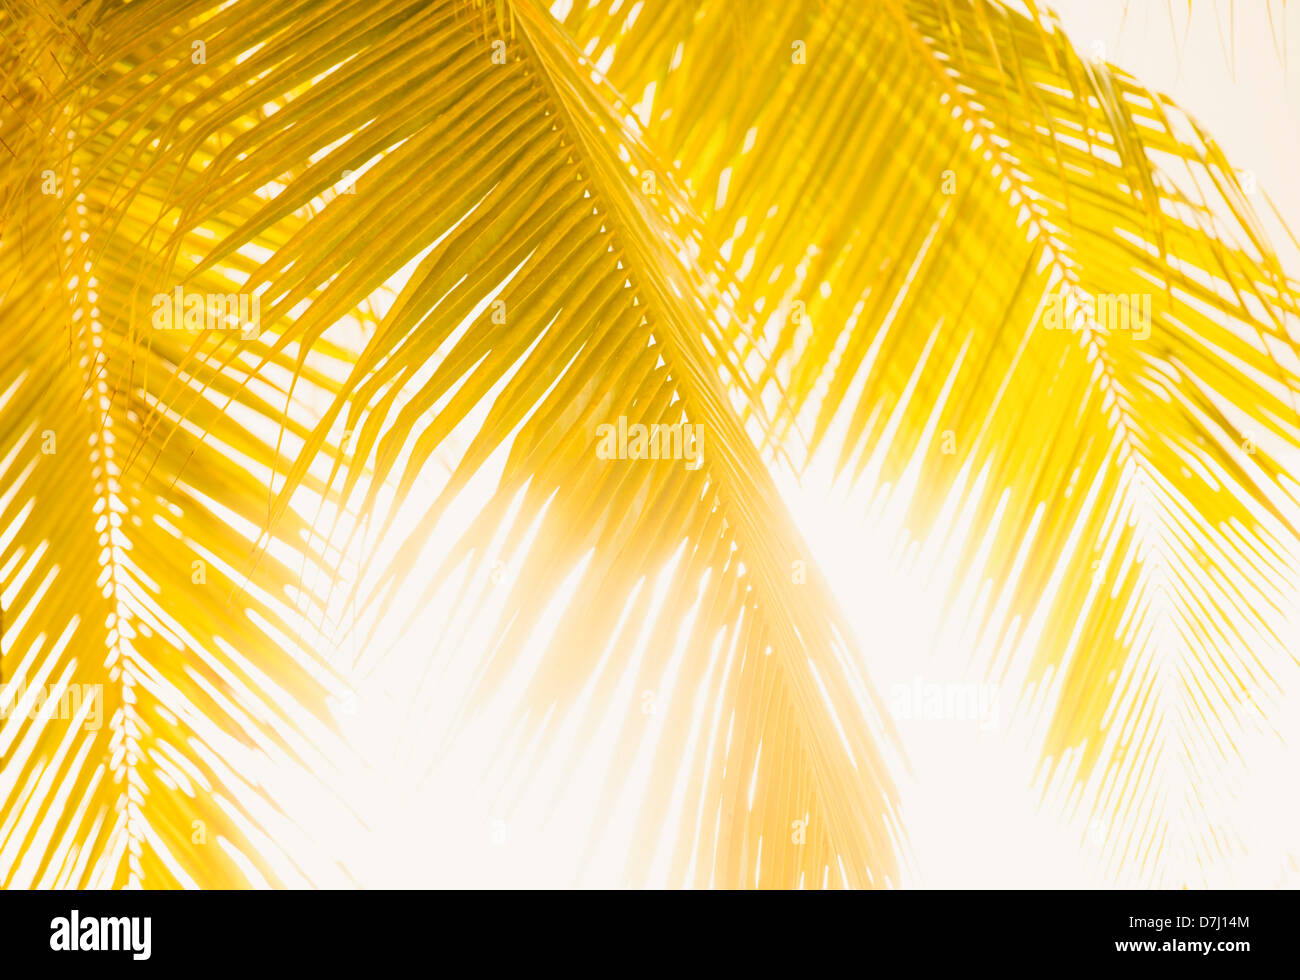 Jamaica, Silhouette of palm leaves Stock Photo